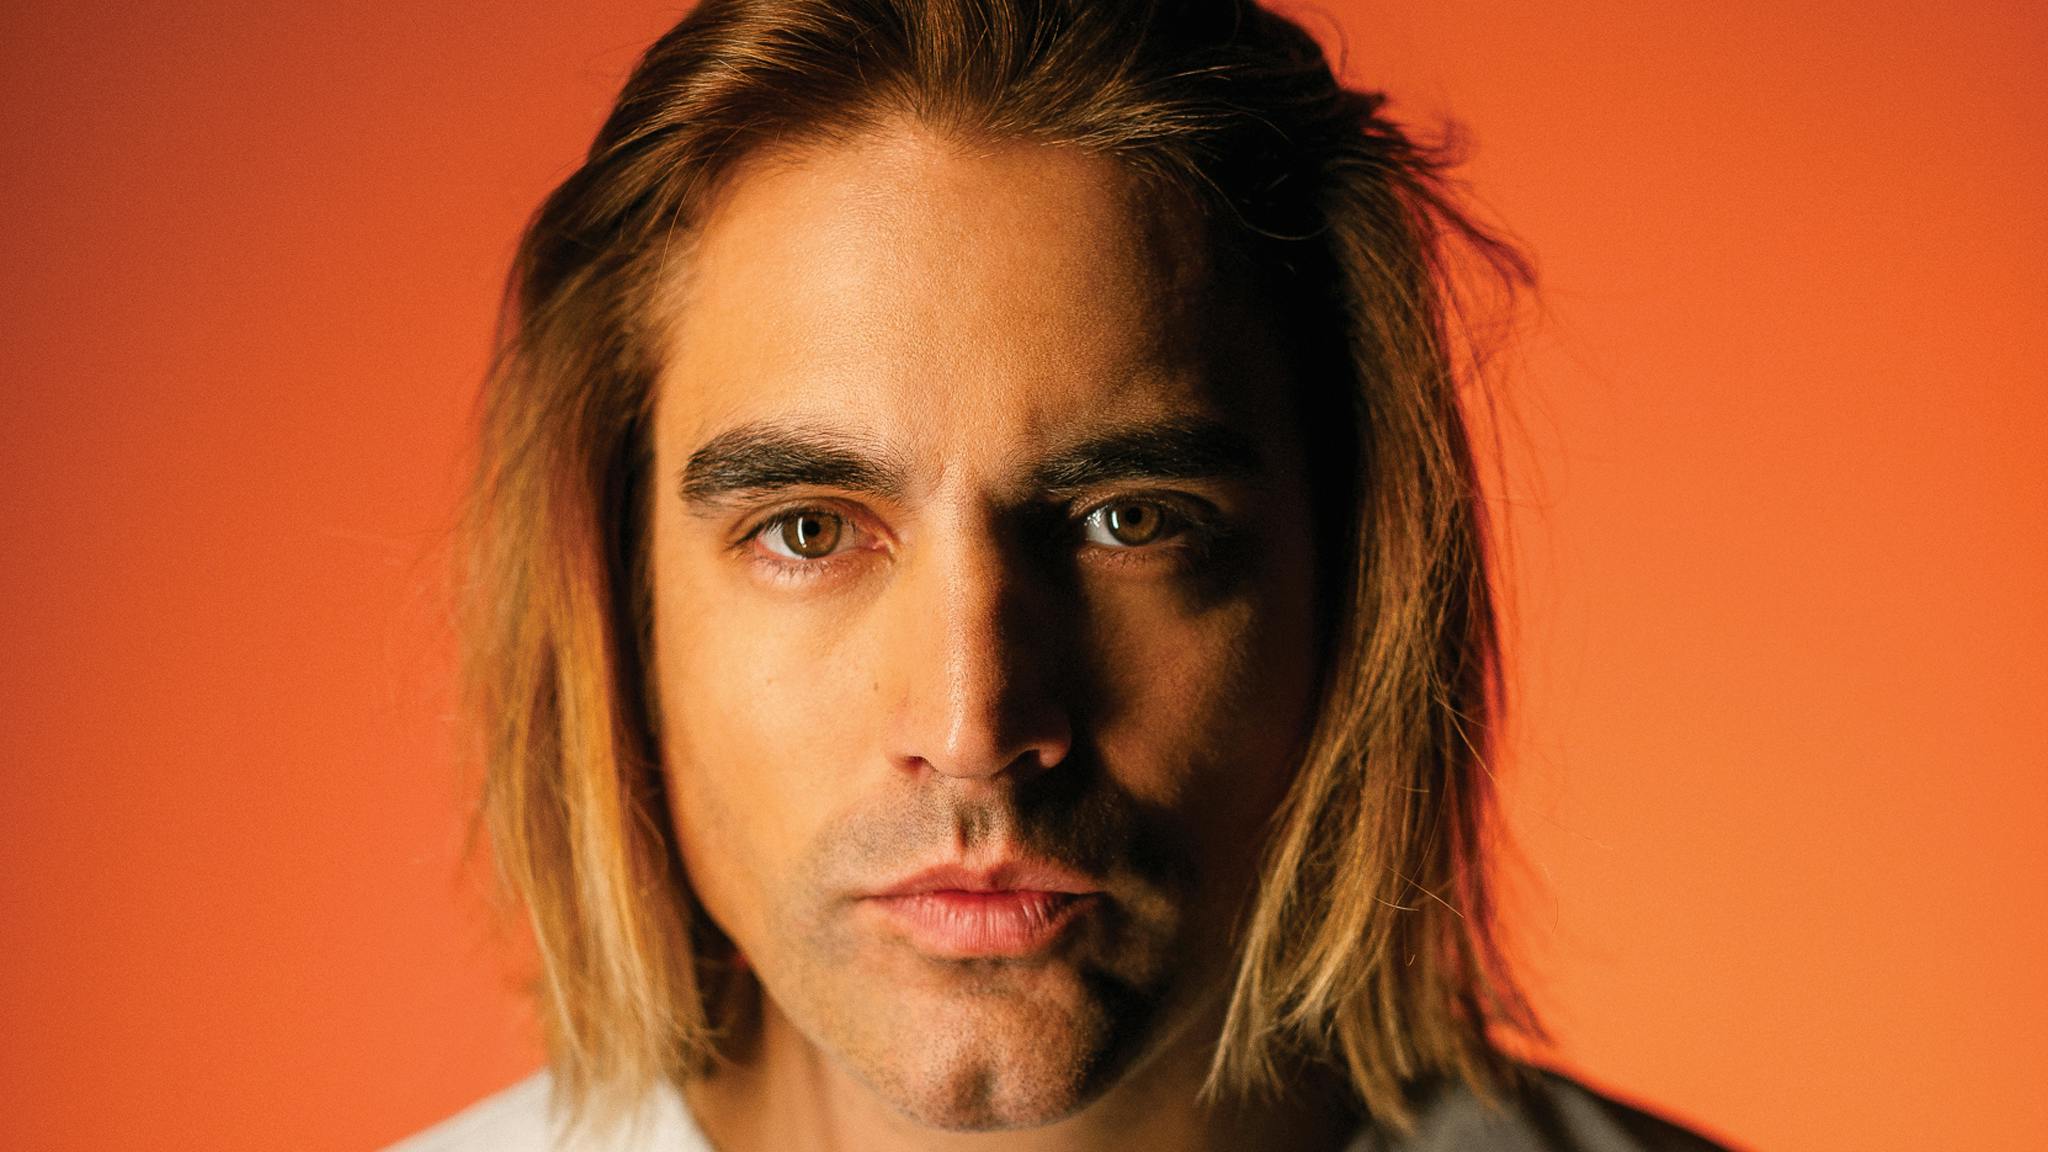 From Deftones to Jon Hopkins: The icons who inspired Charlie Simpson